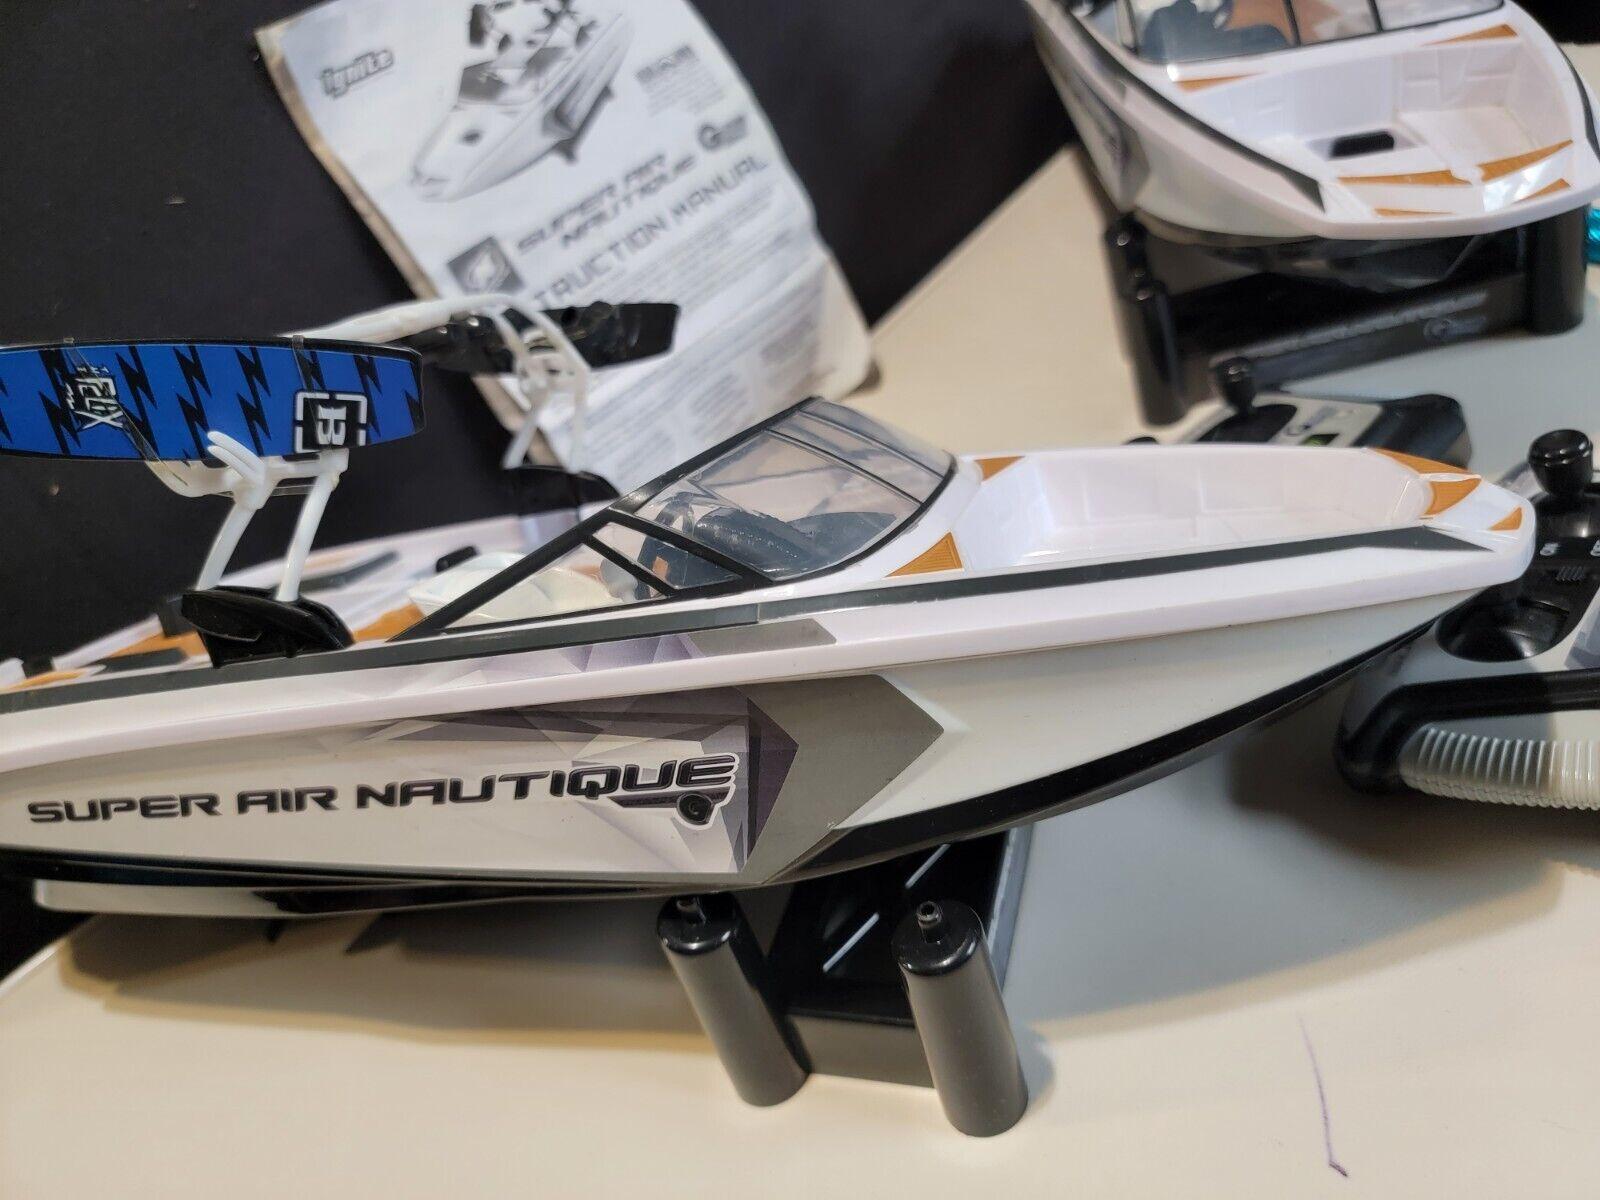 Super Air Nautique Rc Boat:  Experience high-speed thrills and impressive tricks with the super air nautique rc boat.